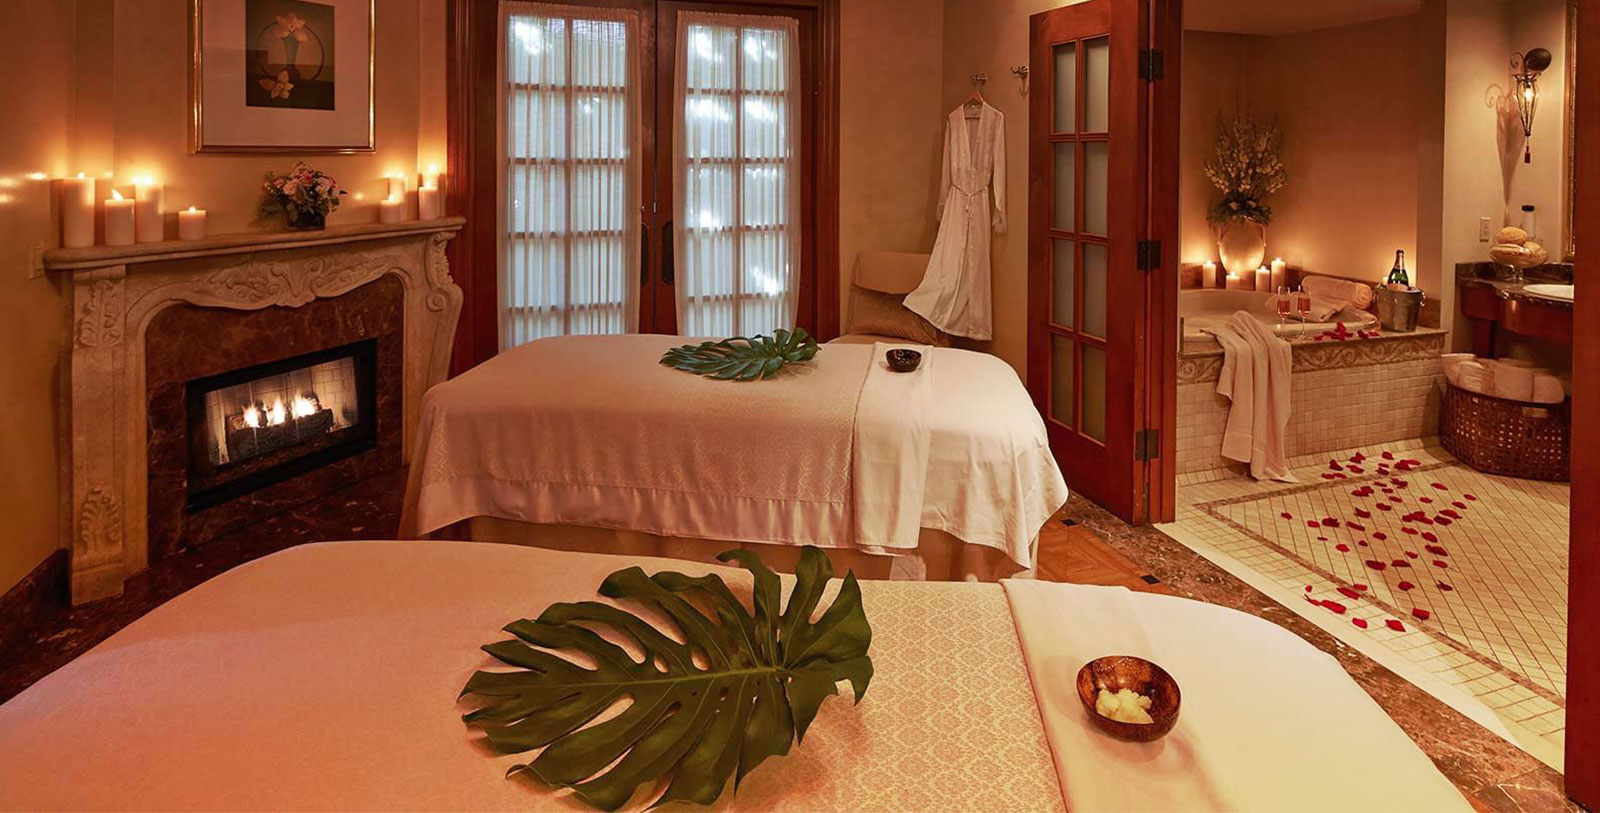 Experience a relaxing day of pampering at Kelly's Spa & Boutique at The Mission Inn.